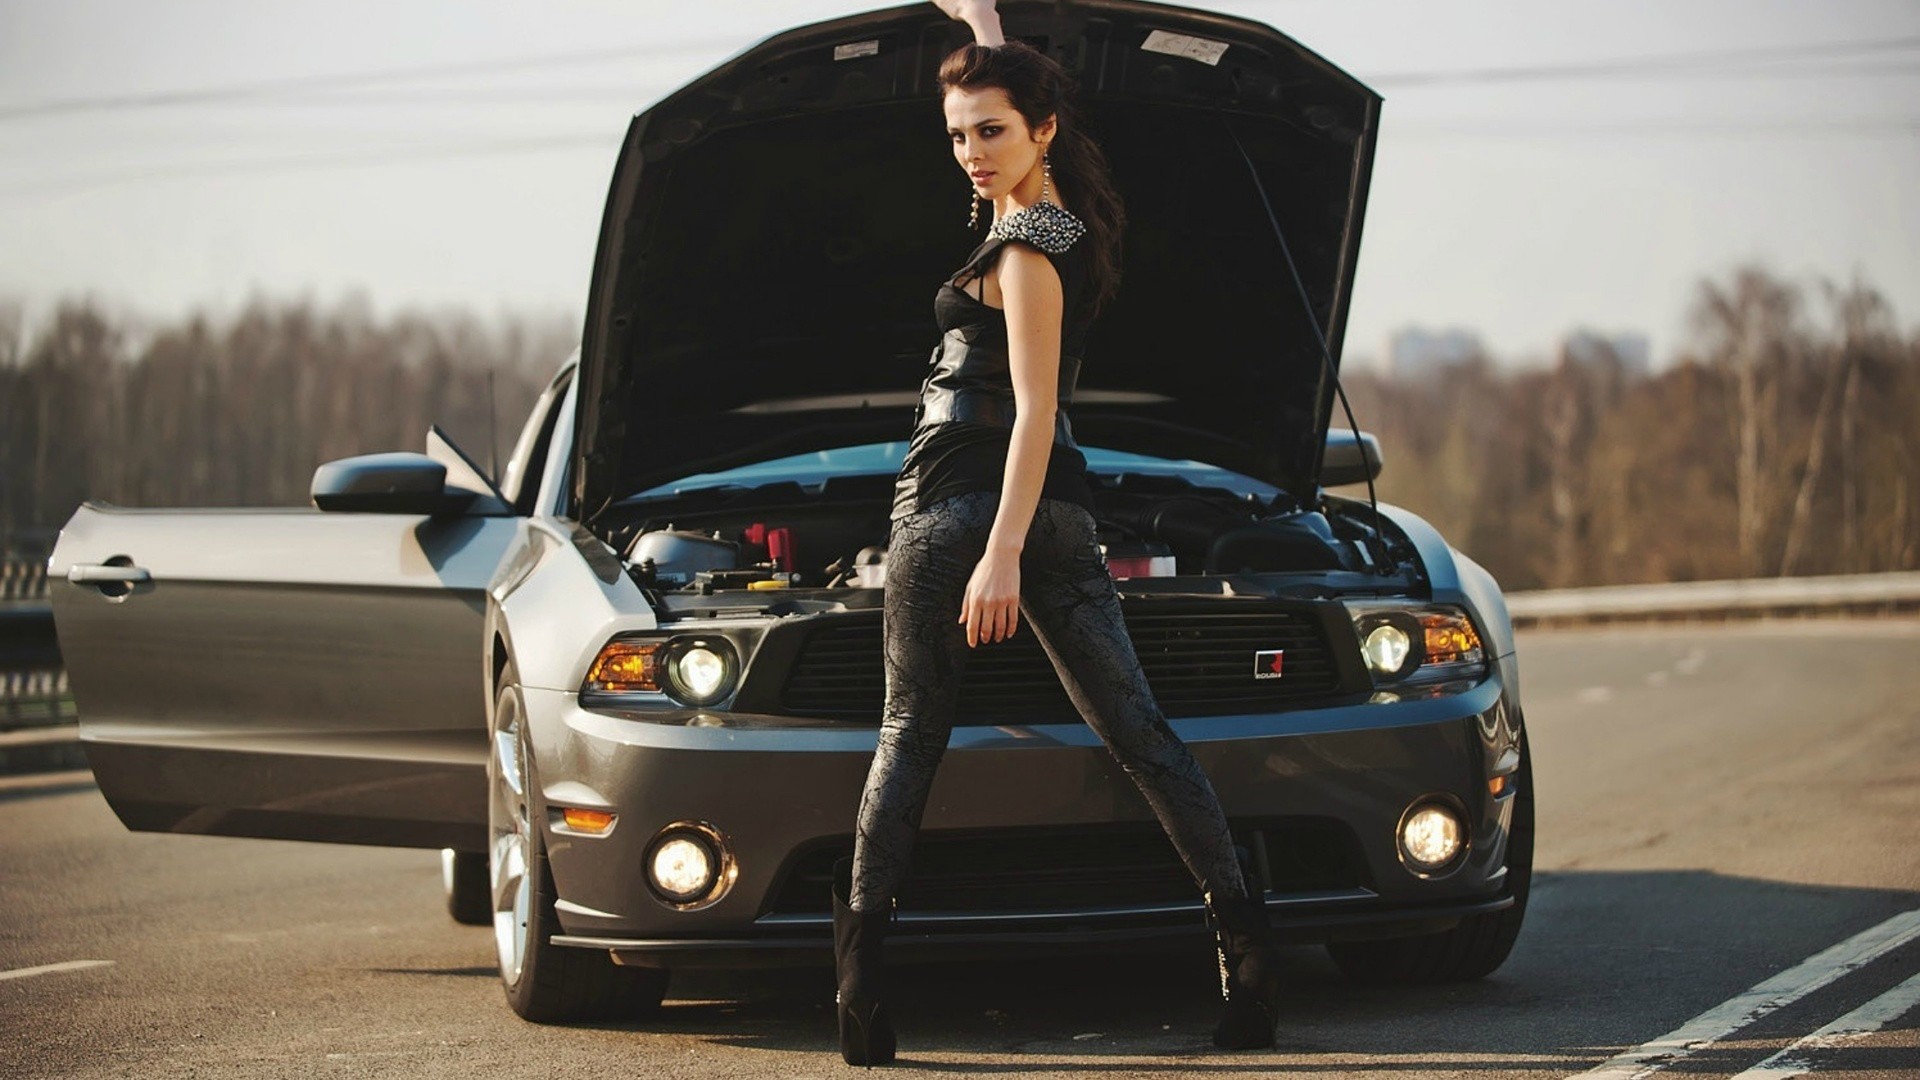 Mustang girls picture for desktop and wallpaper. Yes, thank you